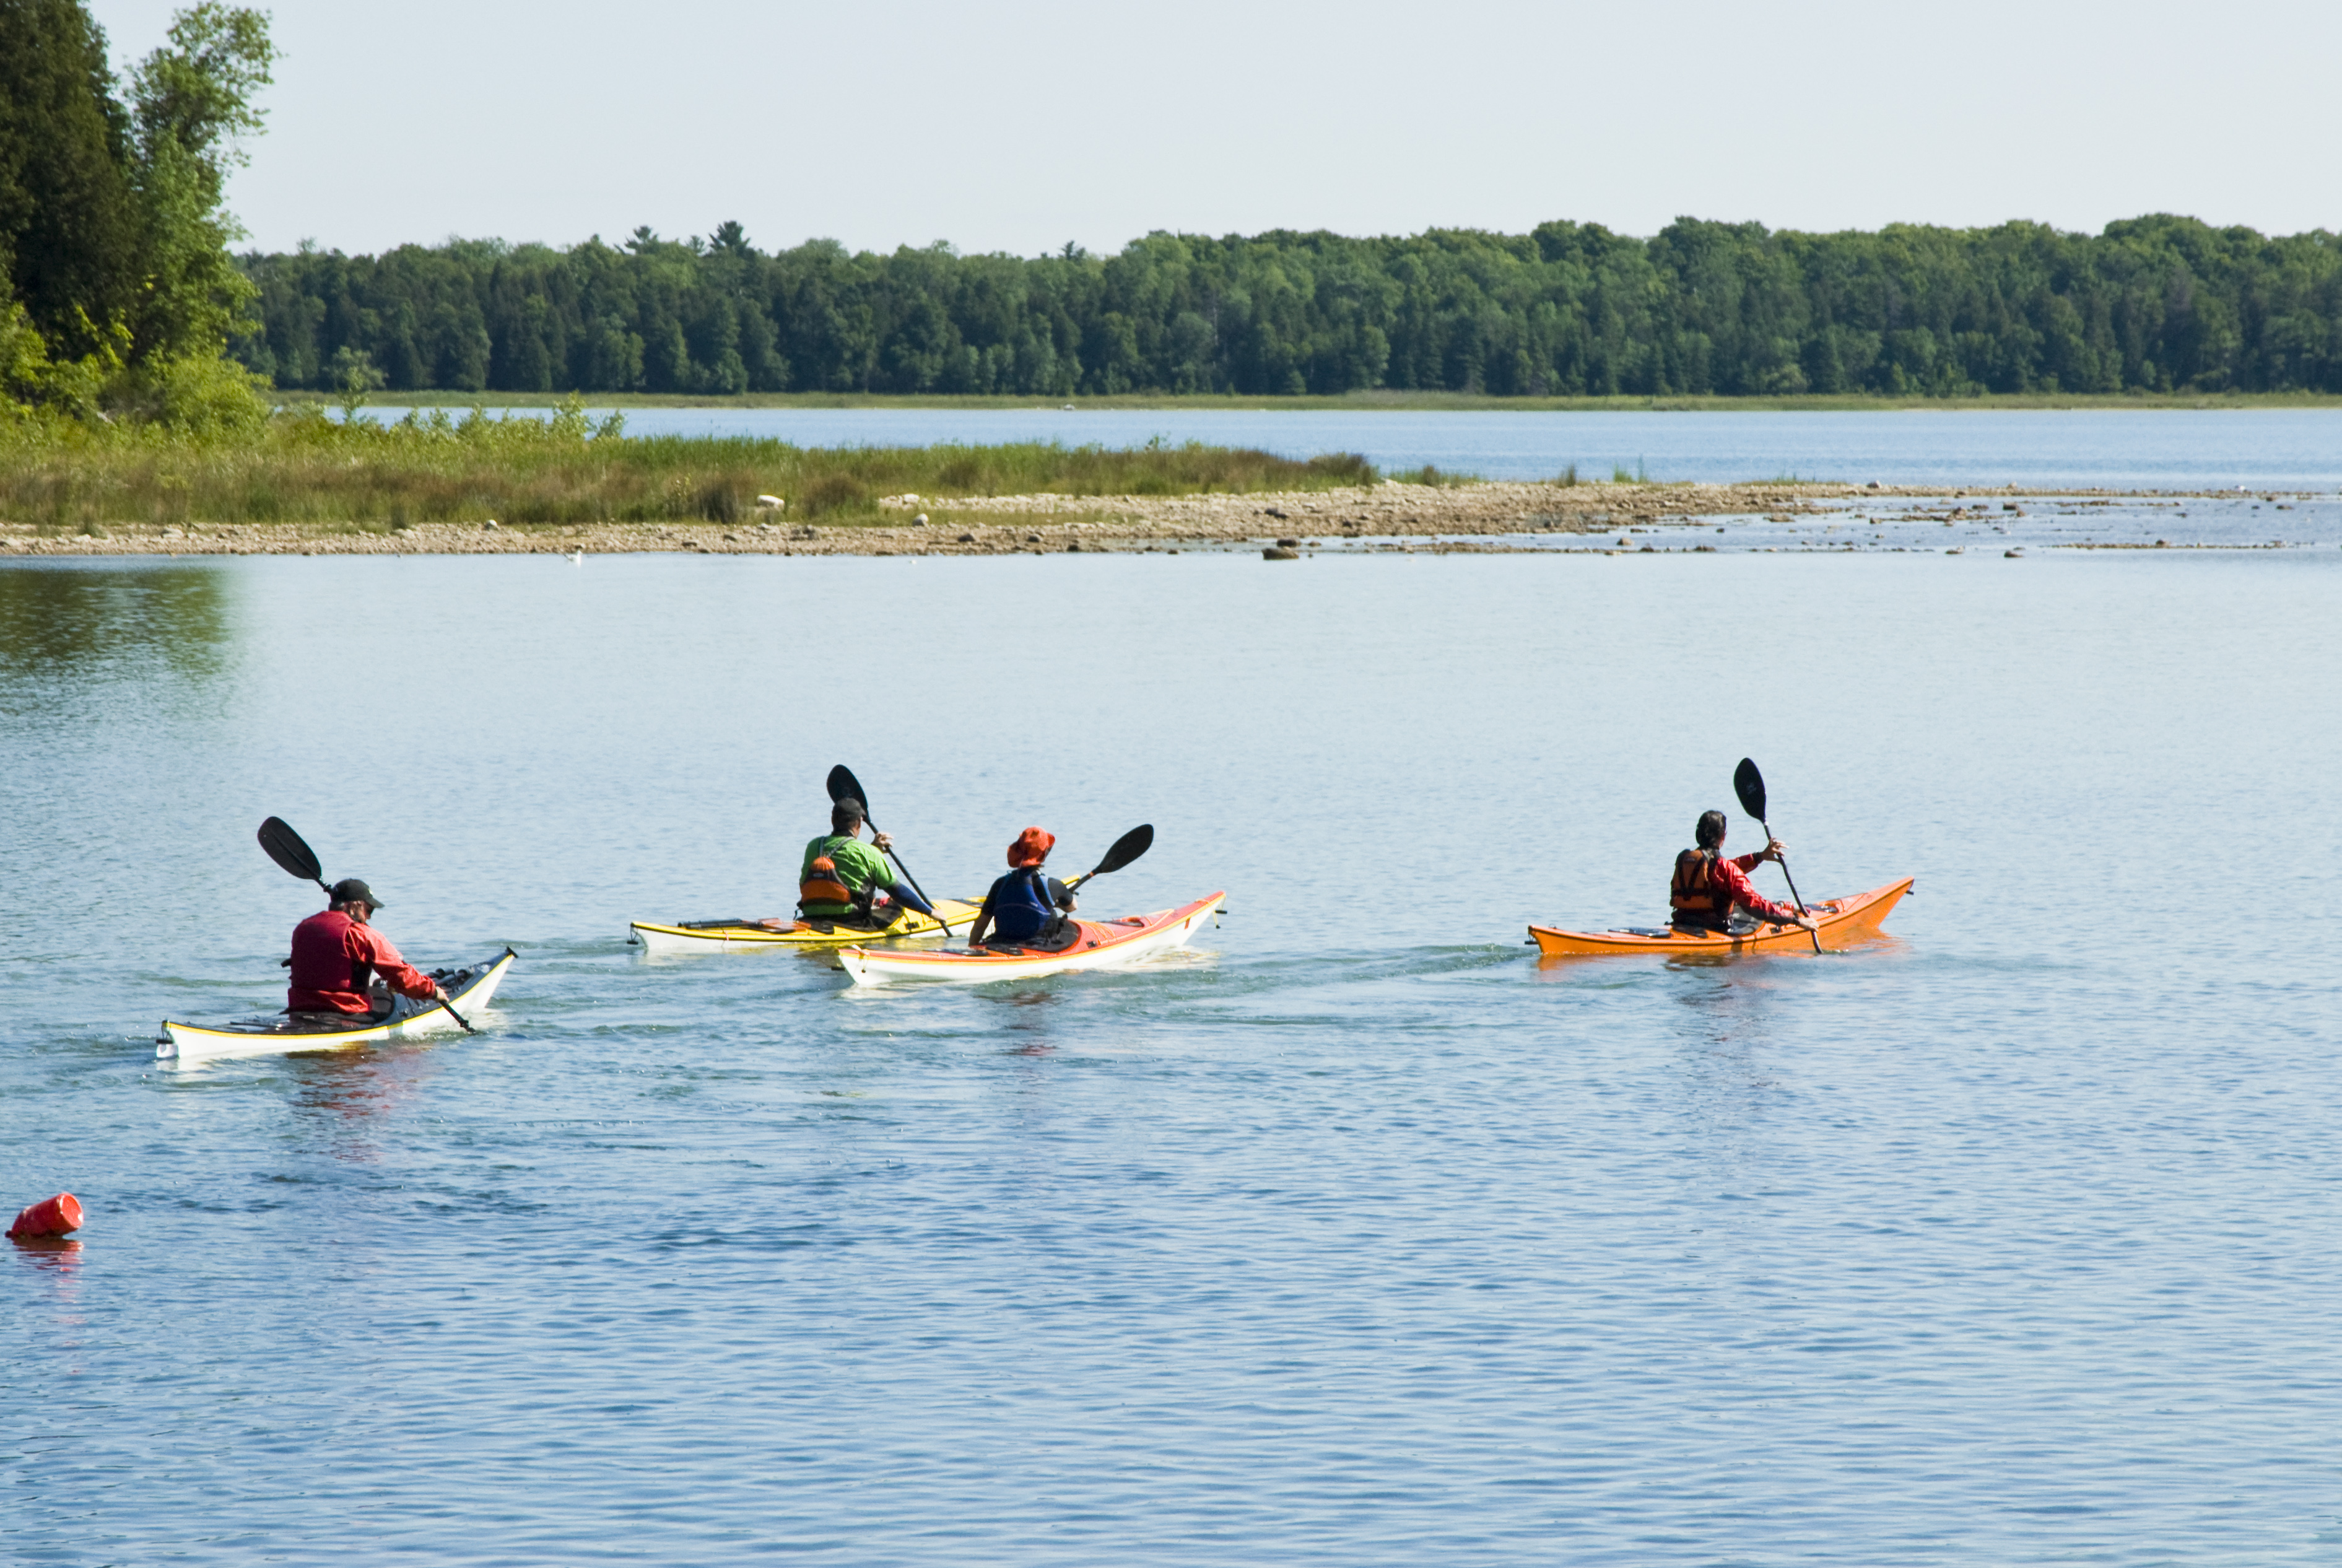 A group of kayakers on a lake fringed with forest shores.